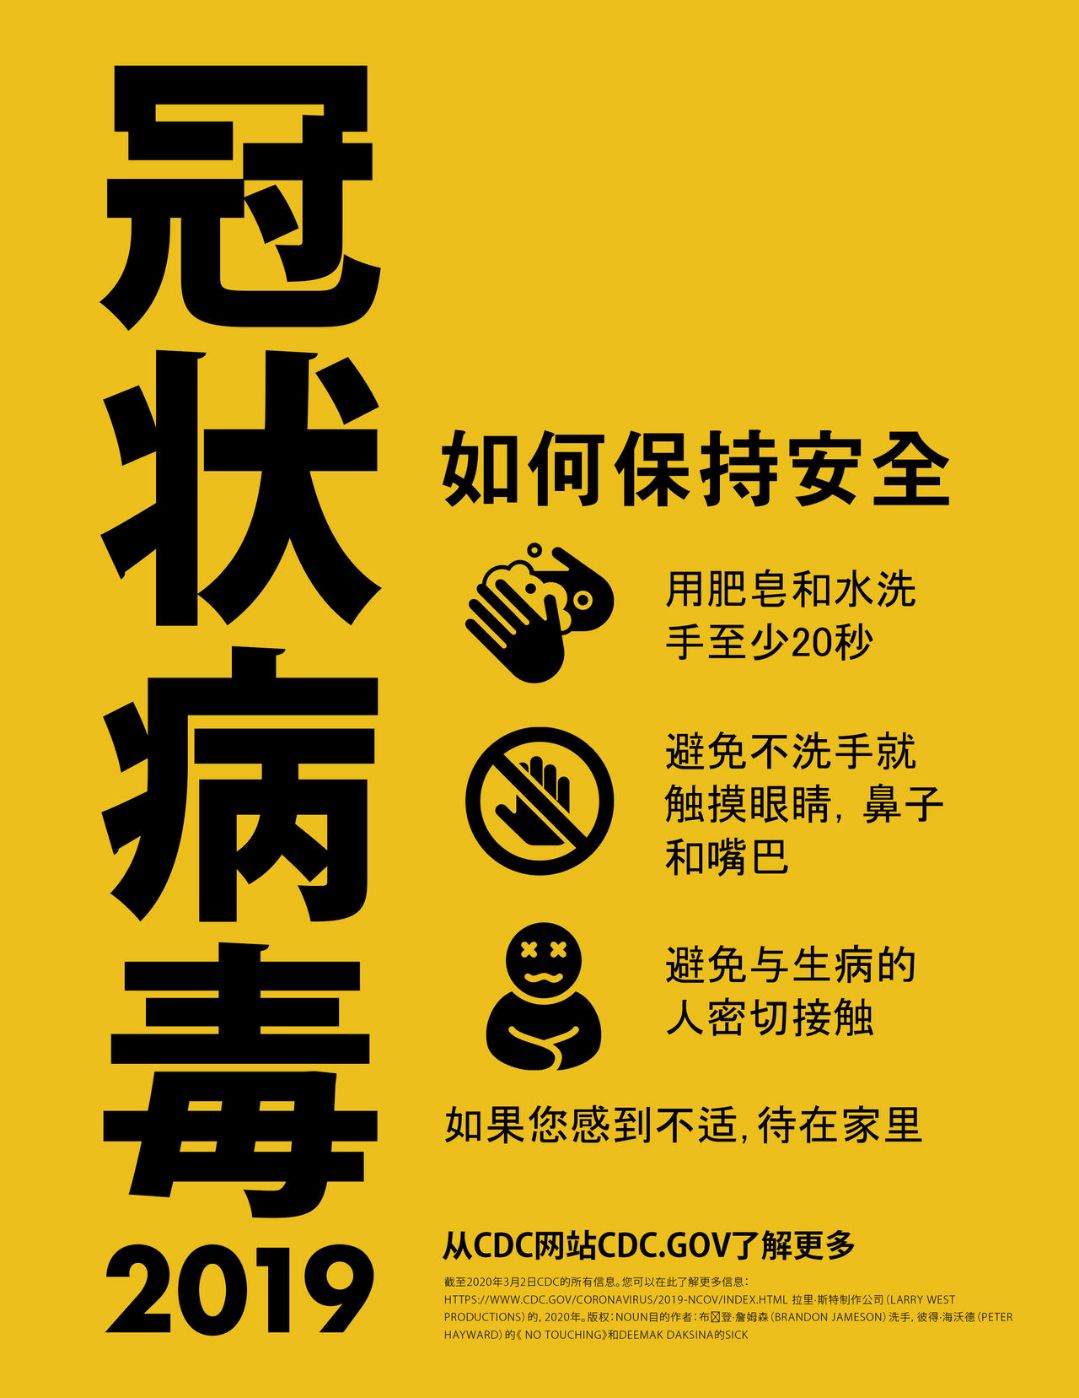 COVID-19 Prevention Poster - Chinese Version